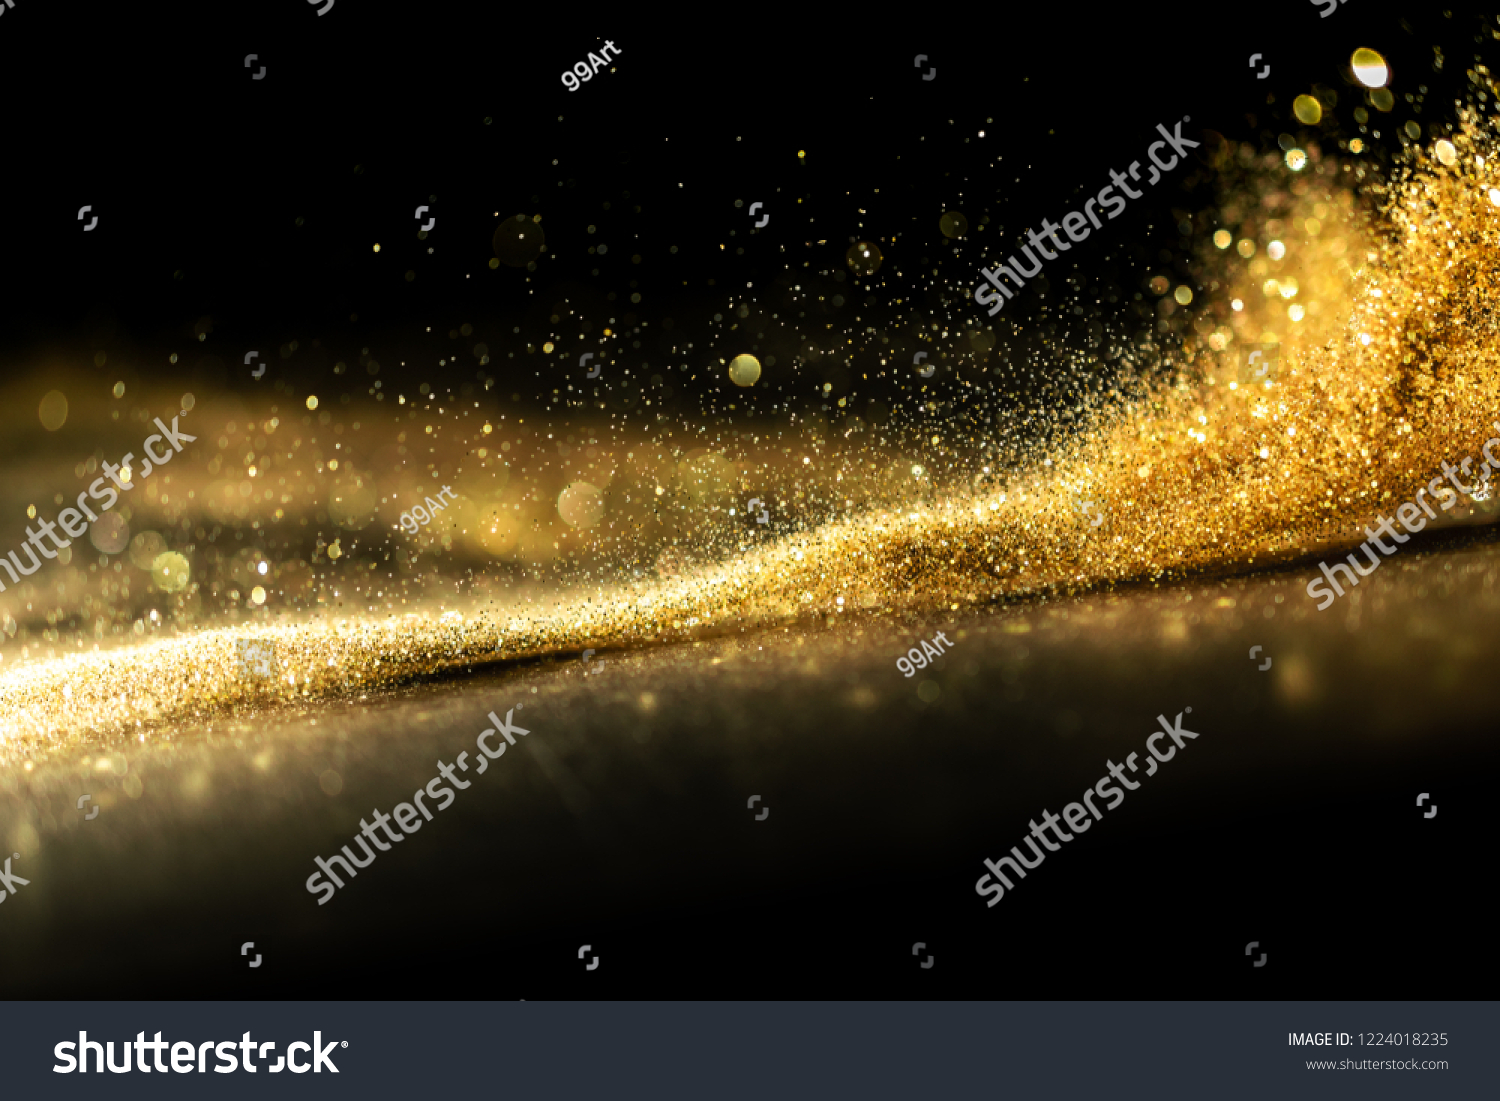 glitter lights grunge background, gold glitter defocused abstract Twinkly Lights Background. #1224018235